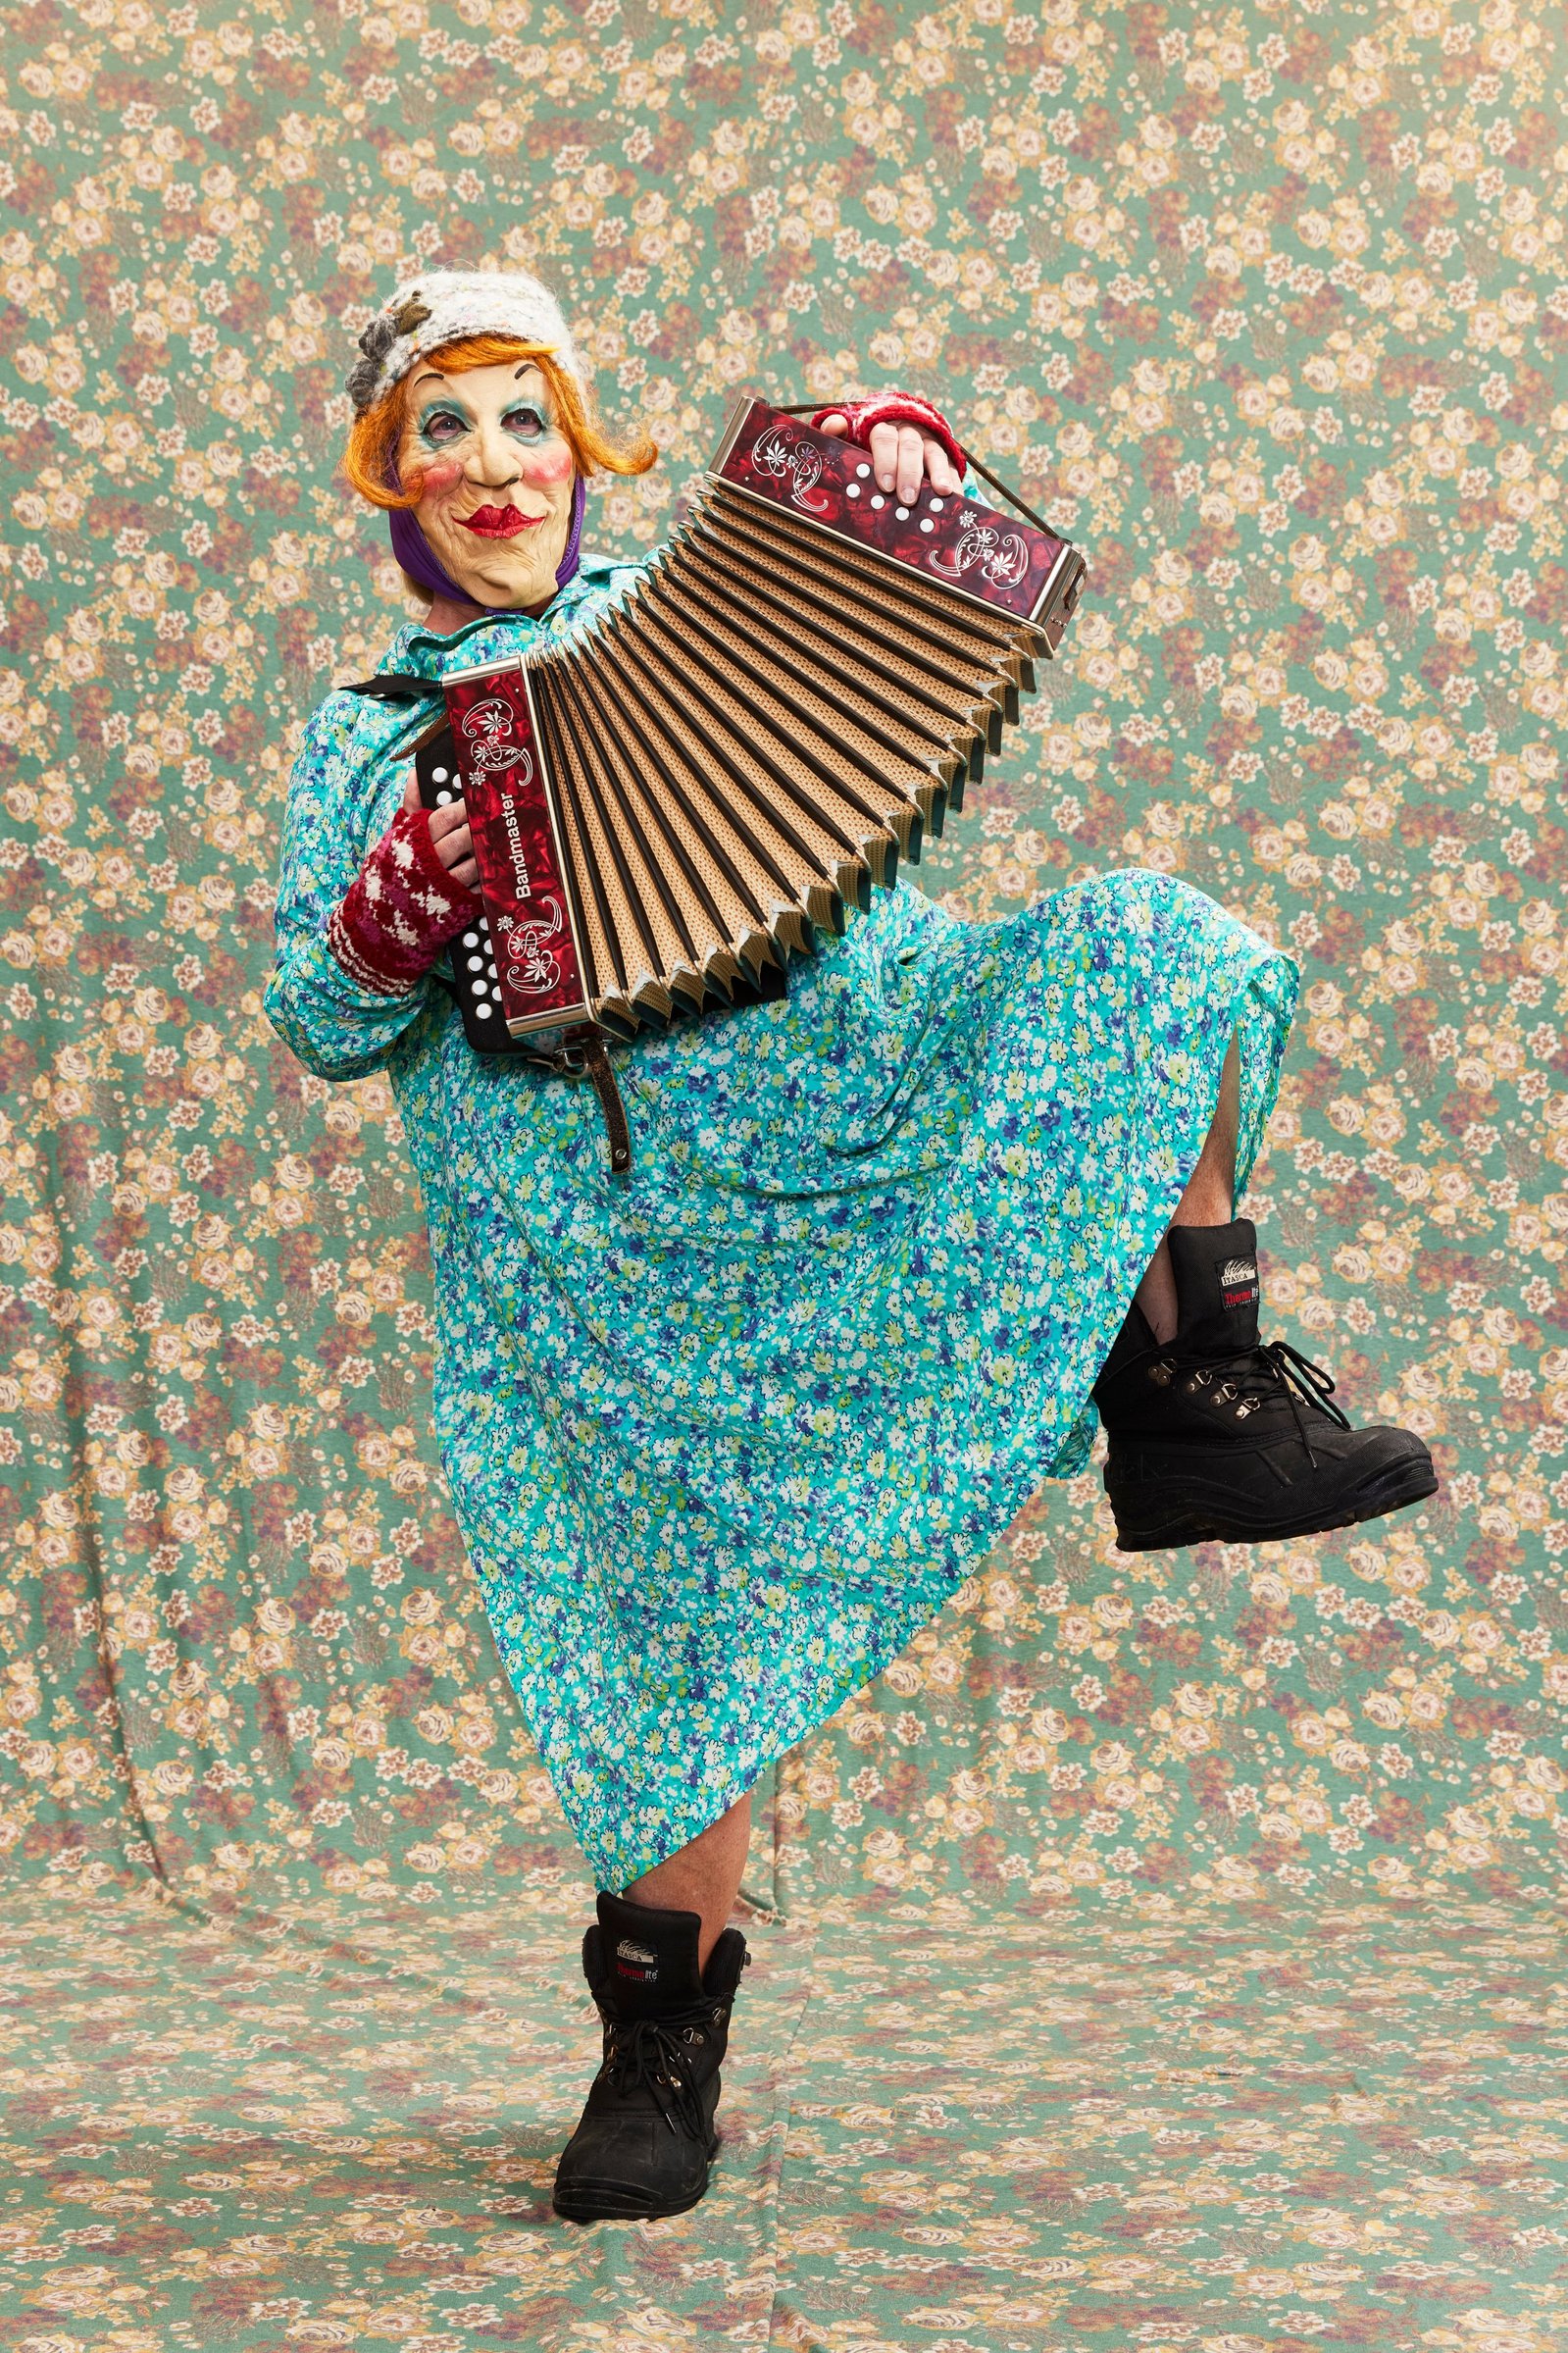 Portrait of a mummer in St John's, Newfoundland. Jill Richards was photographed by Adam Coish Photography in 2022.